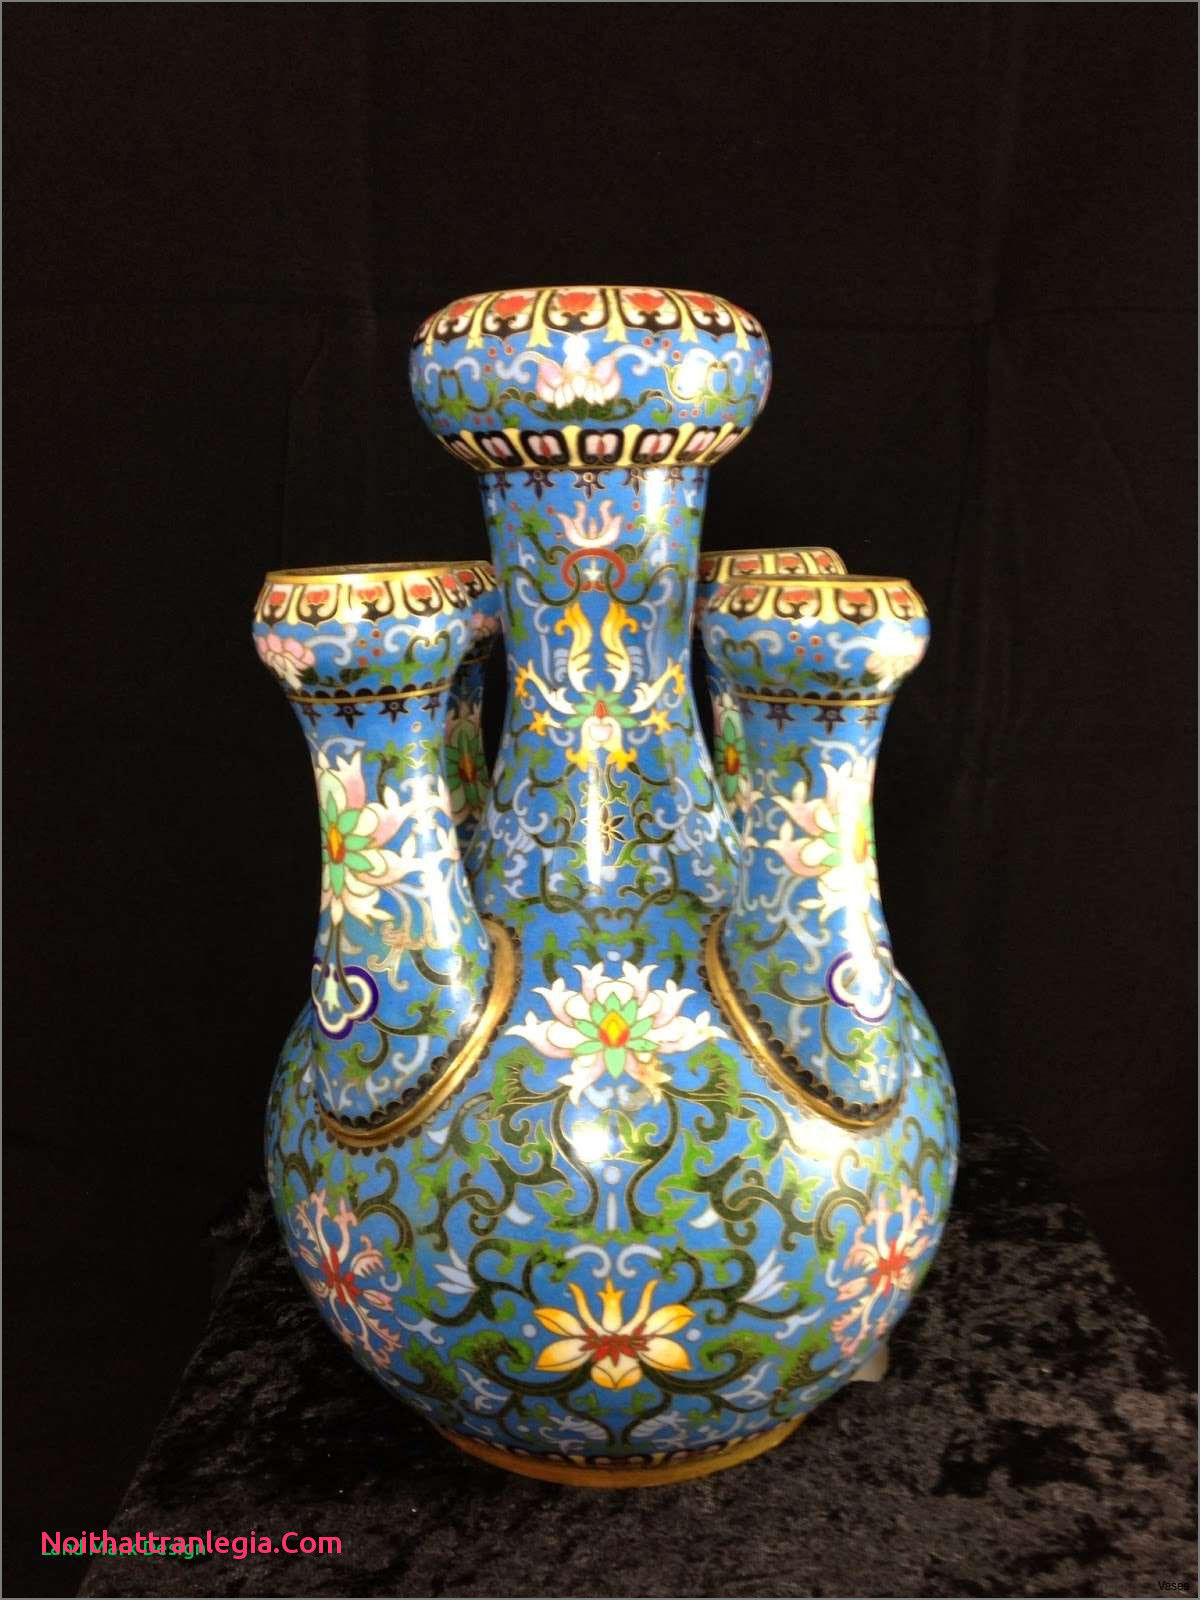 24 Famous song Dynasty Vase 2024 free download song dynasty vase of 20 chinese antique vase noithattranlegia vases design throughout 213 1h vases antique asian the increased trade of chinese ware during 16th century has significantly